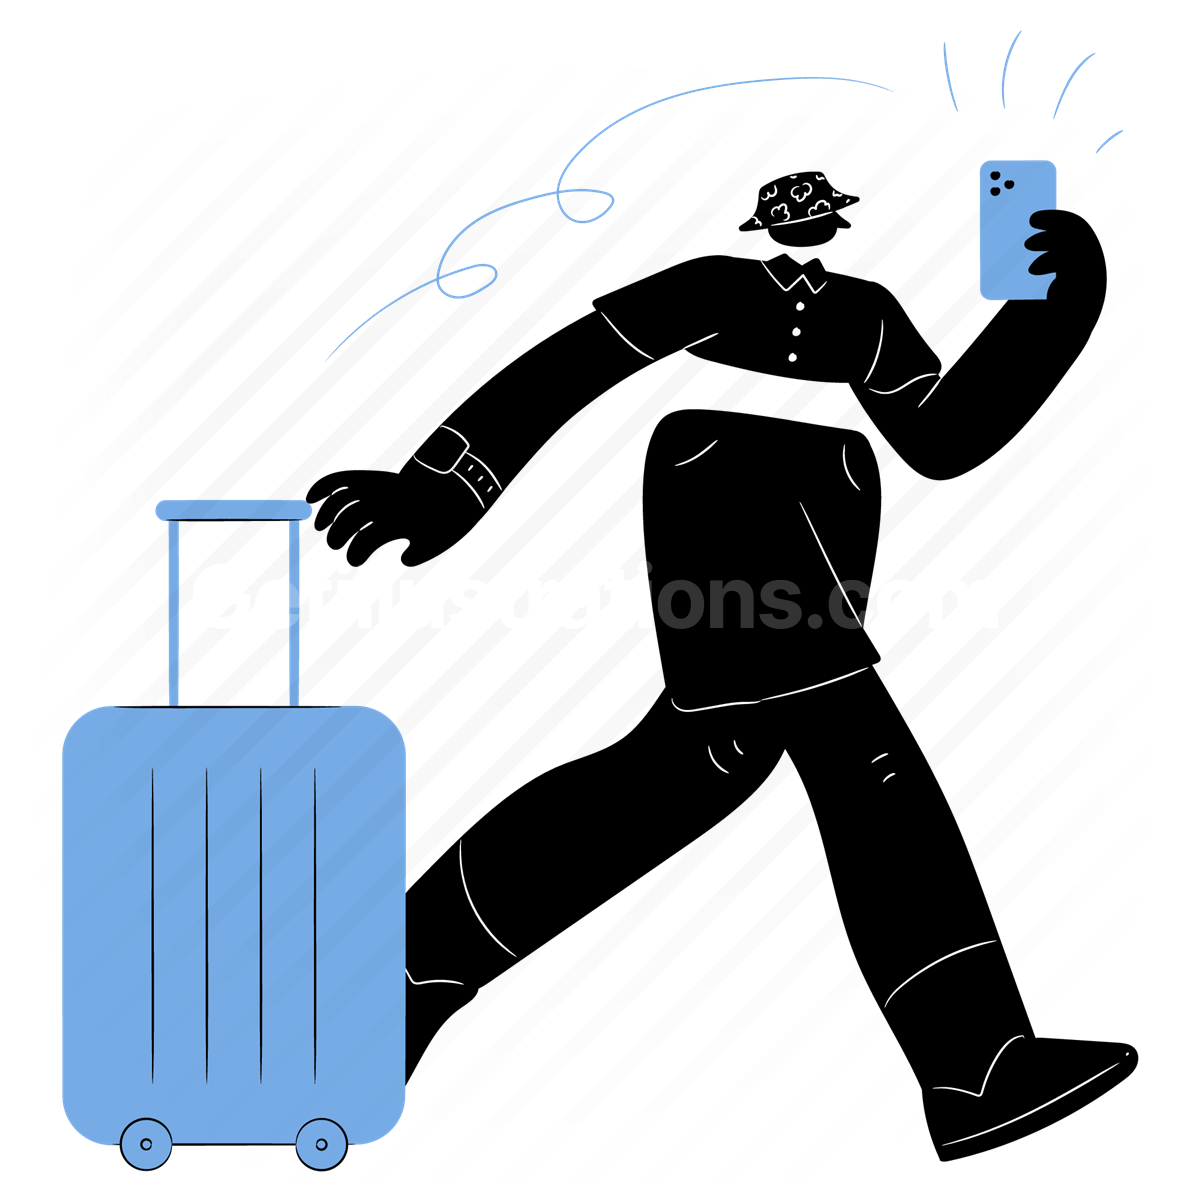 luggage, baggage, smartphone, phone, mobile, airport, tourist, tourism